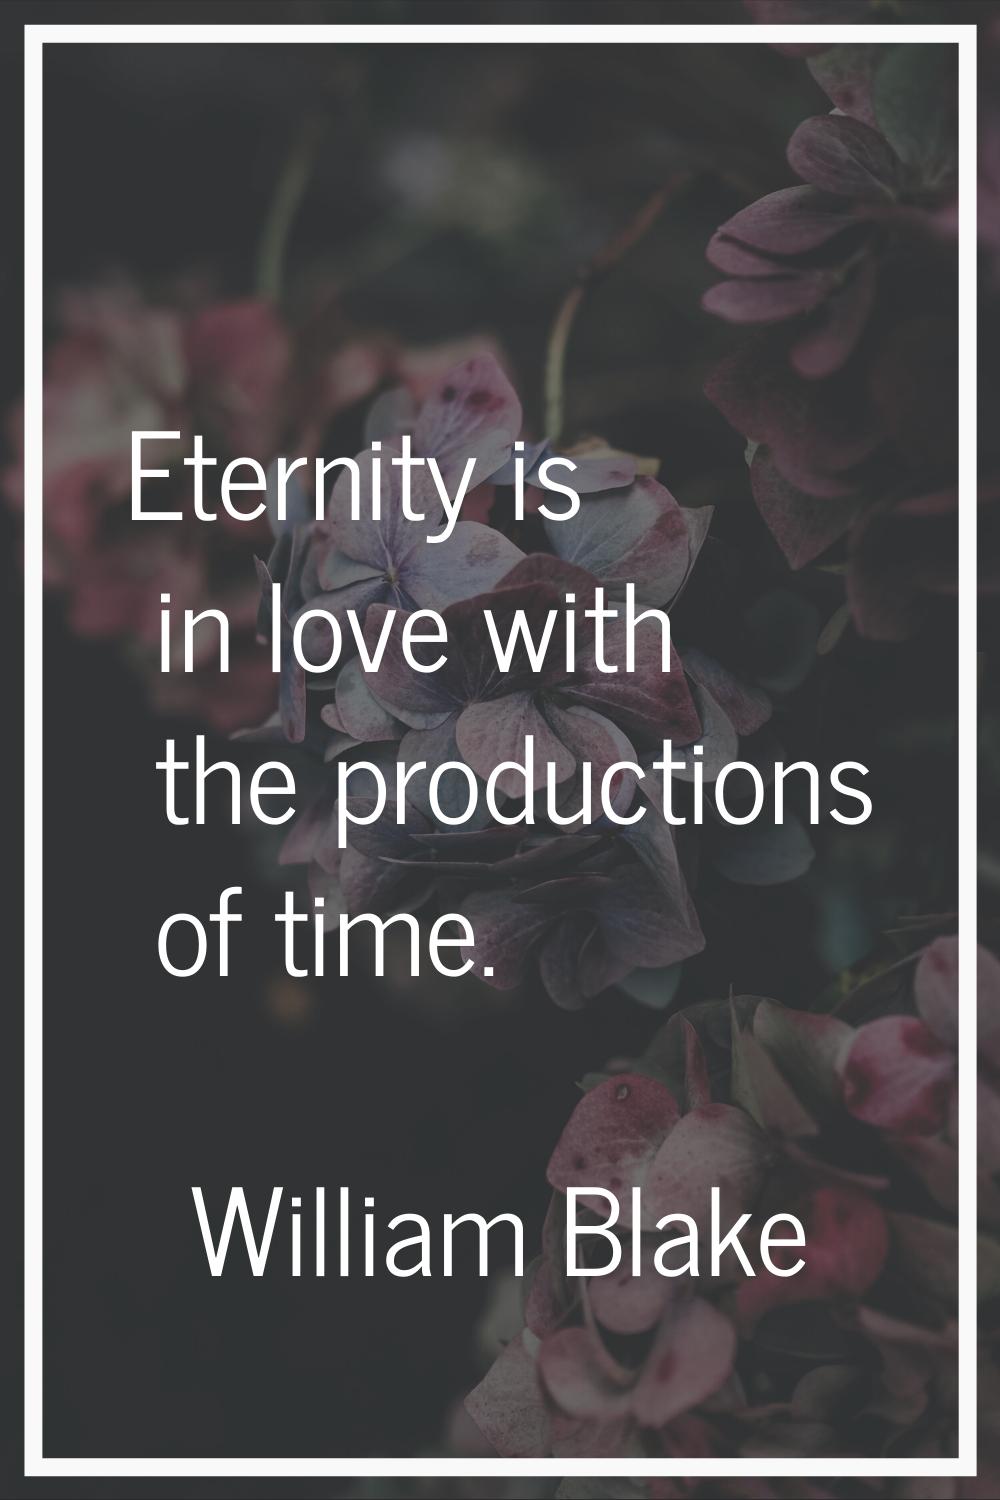 Eternity is in love with the productions of time.